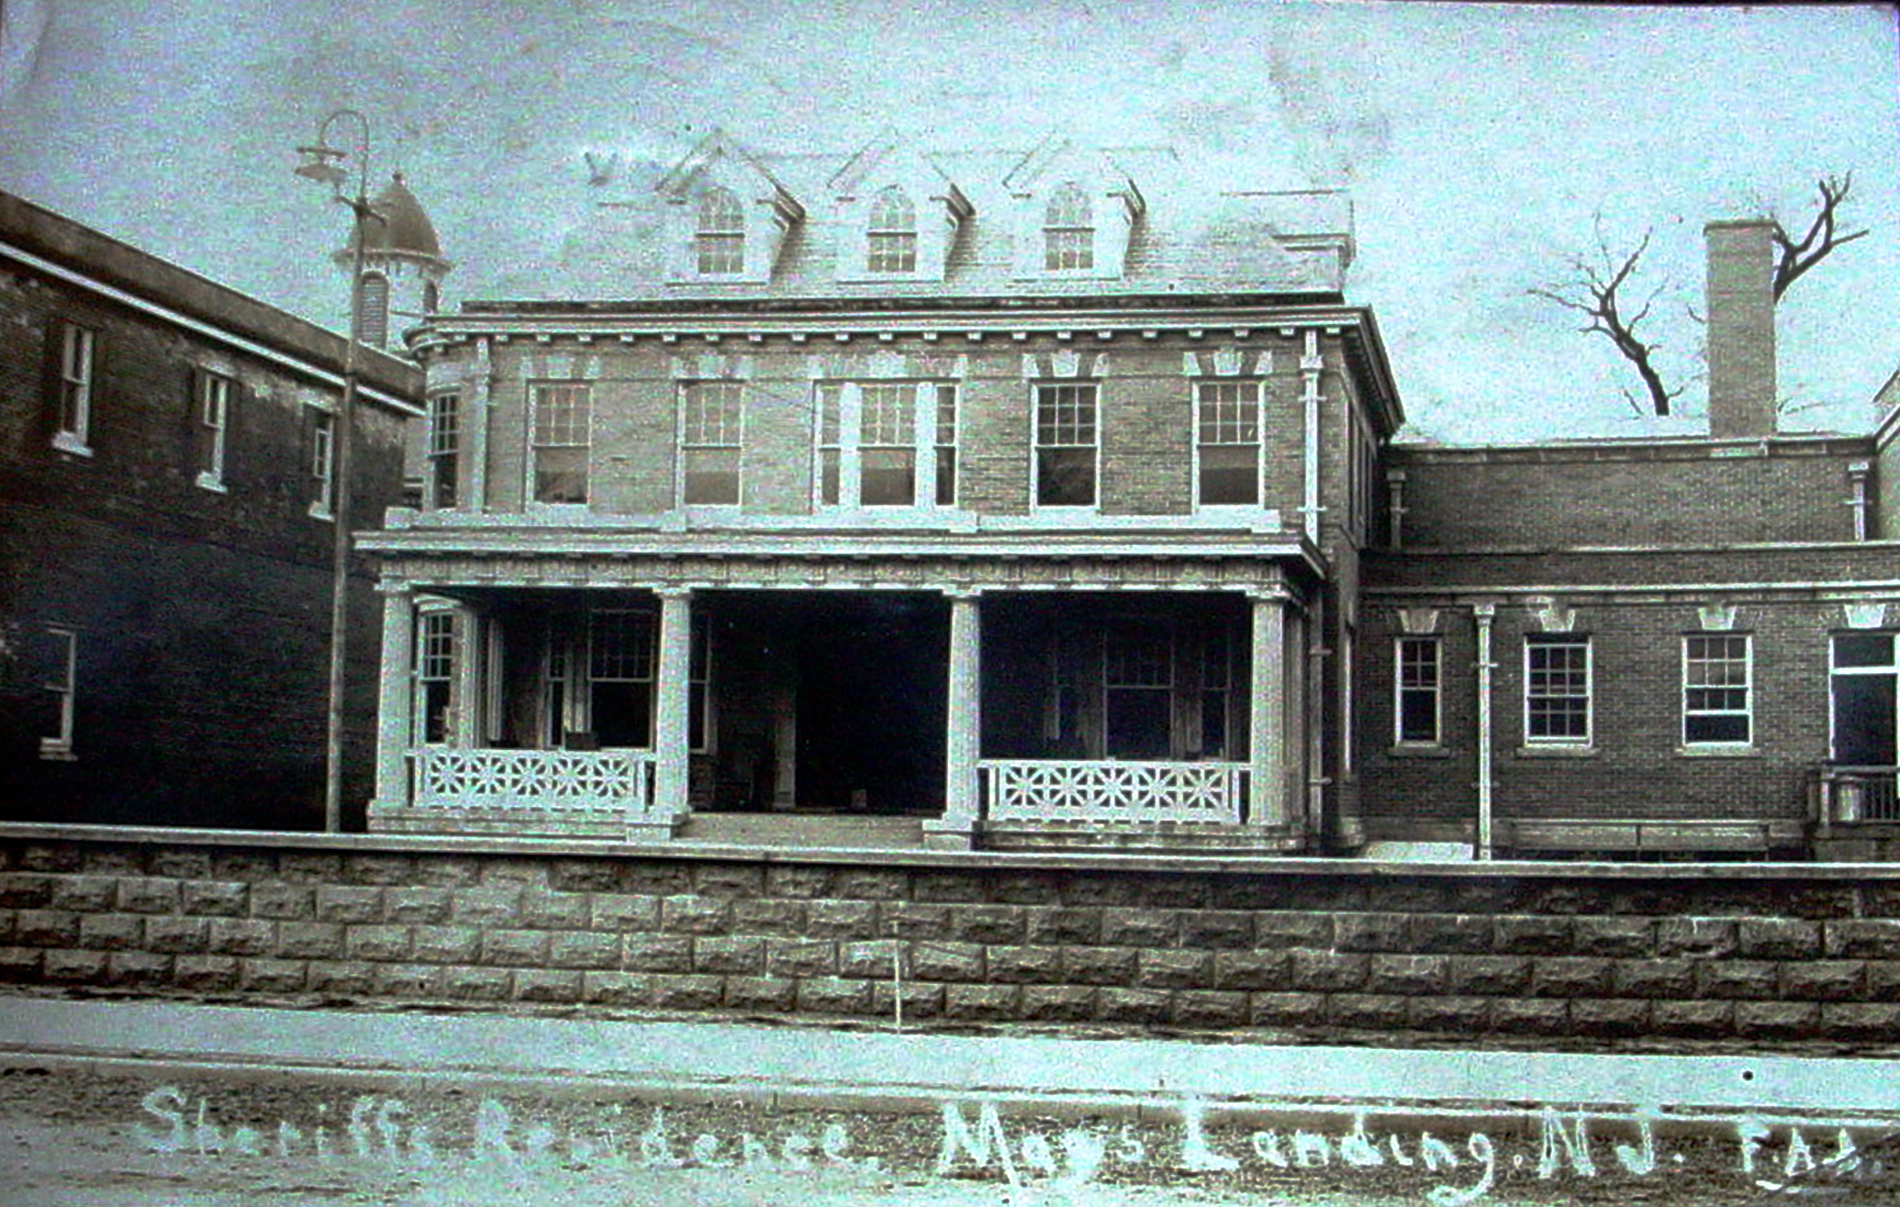 Mays Landing - County Sherisss Residence - c 1910 or so